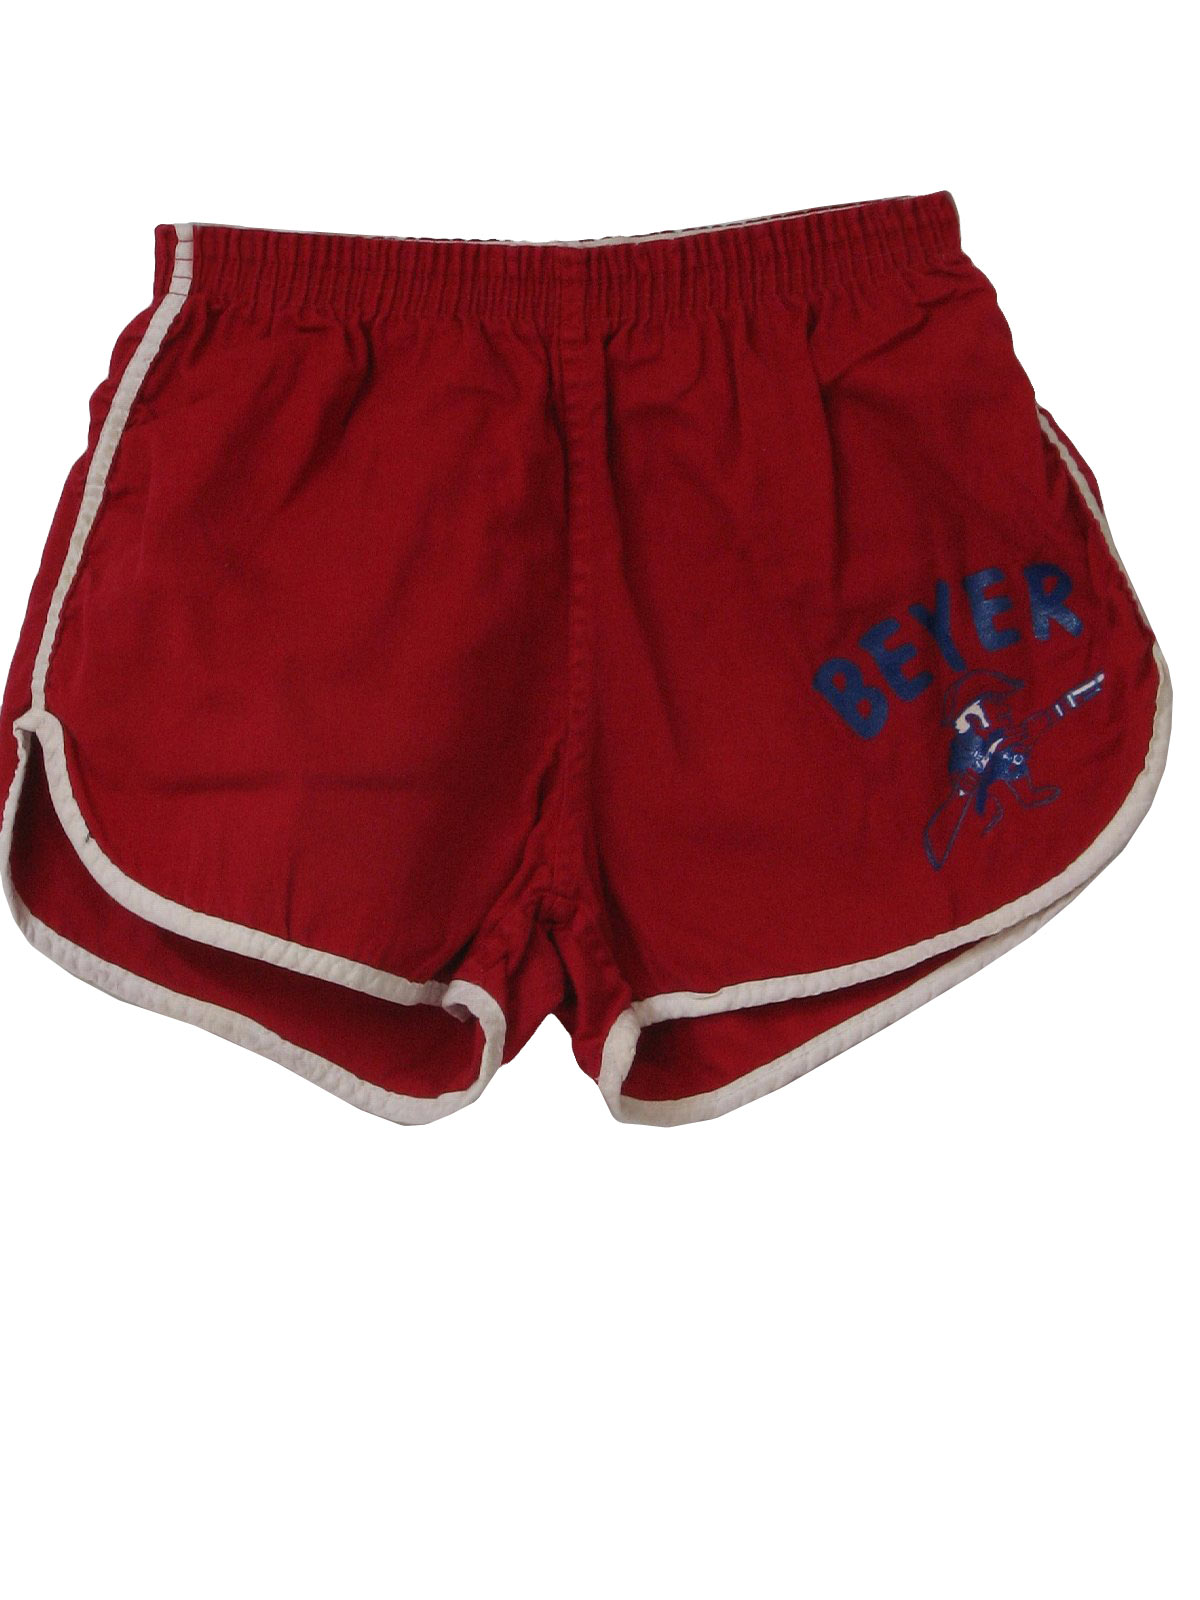 red white and blue champion shorts